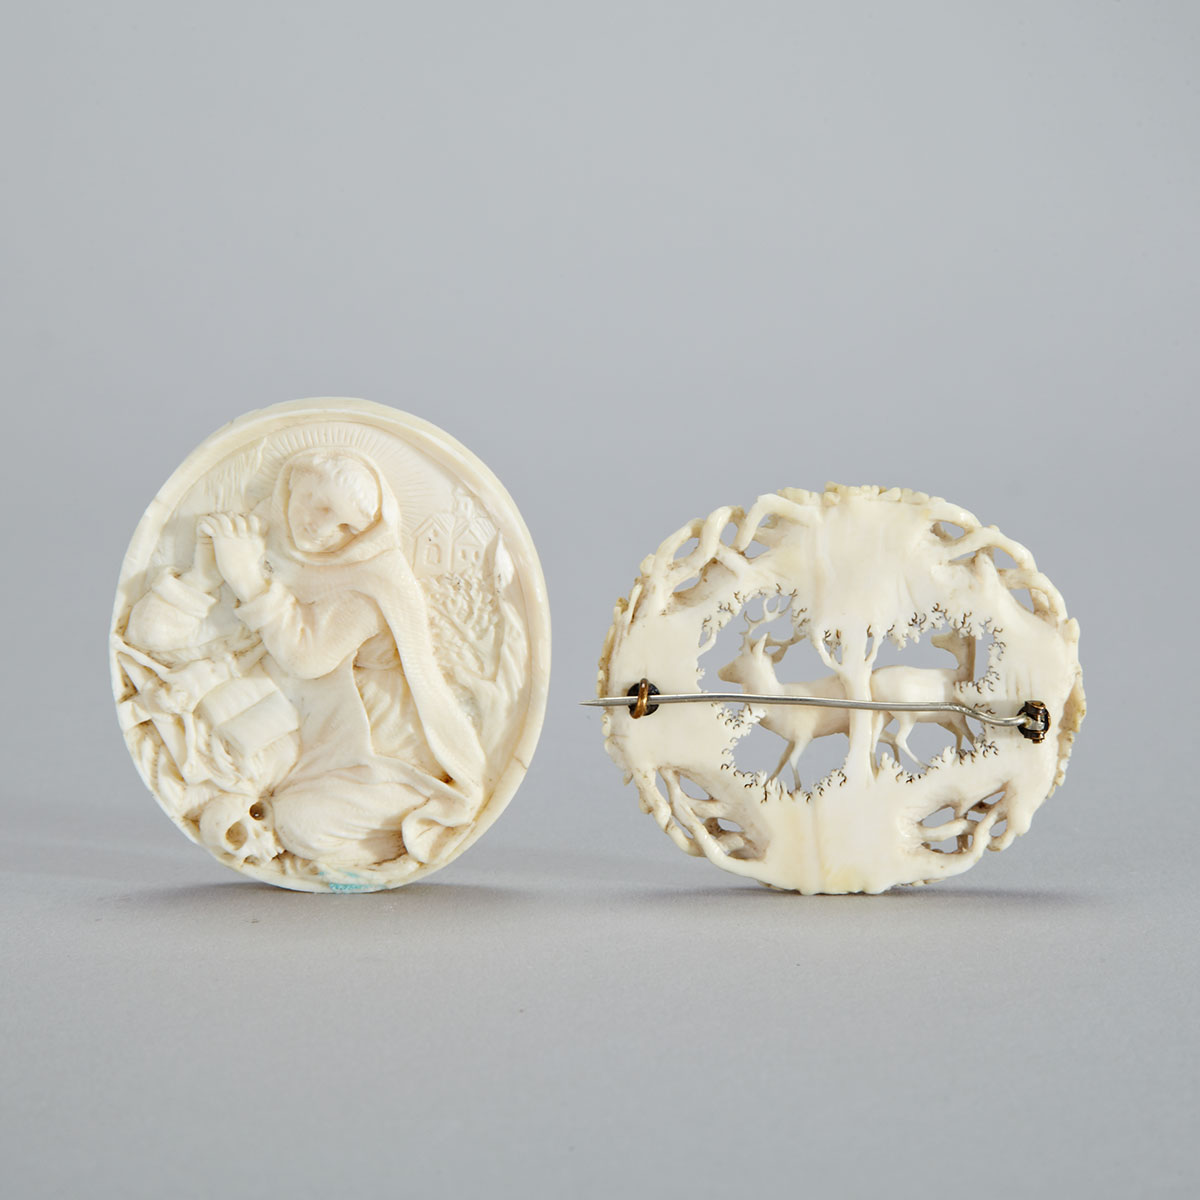 German Carved Ivory Oval Medallion and a Brooch, 19th century